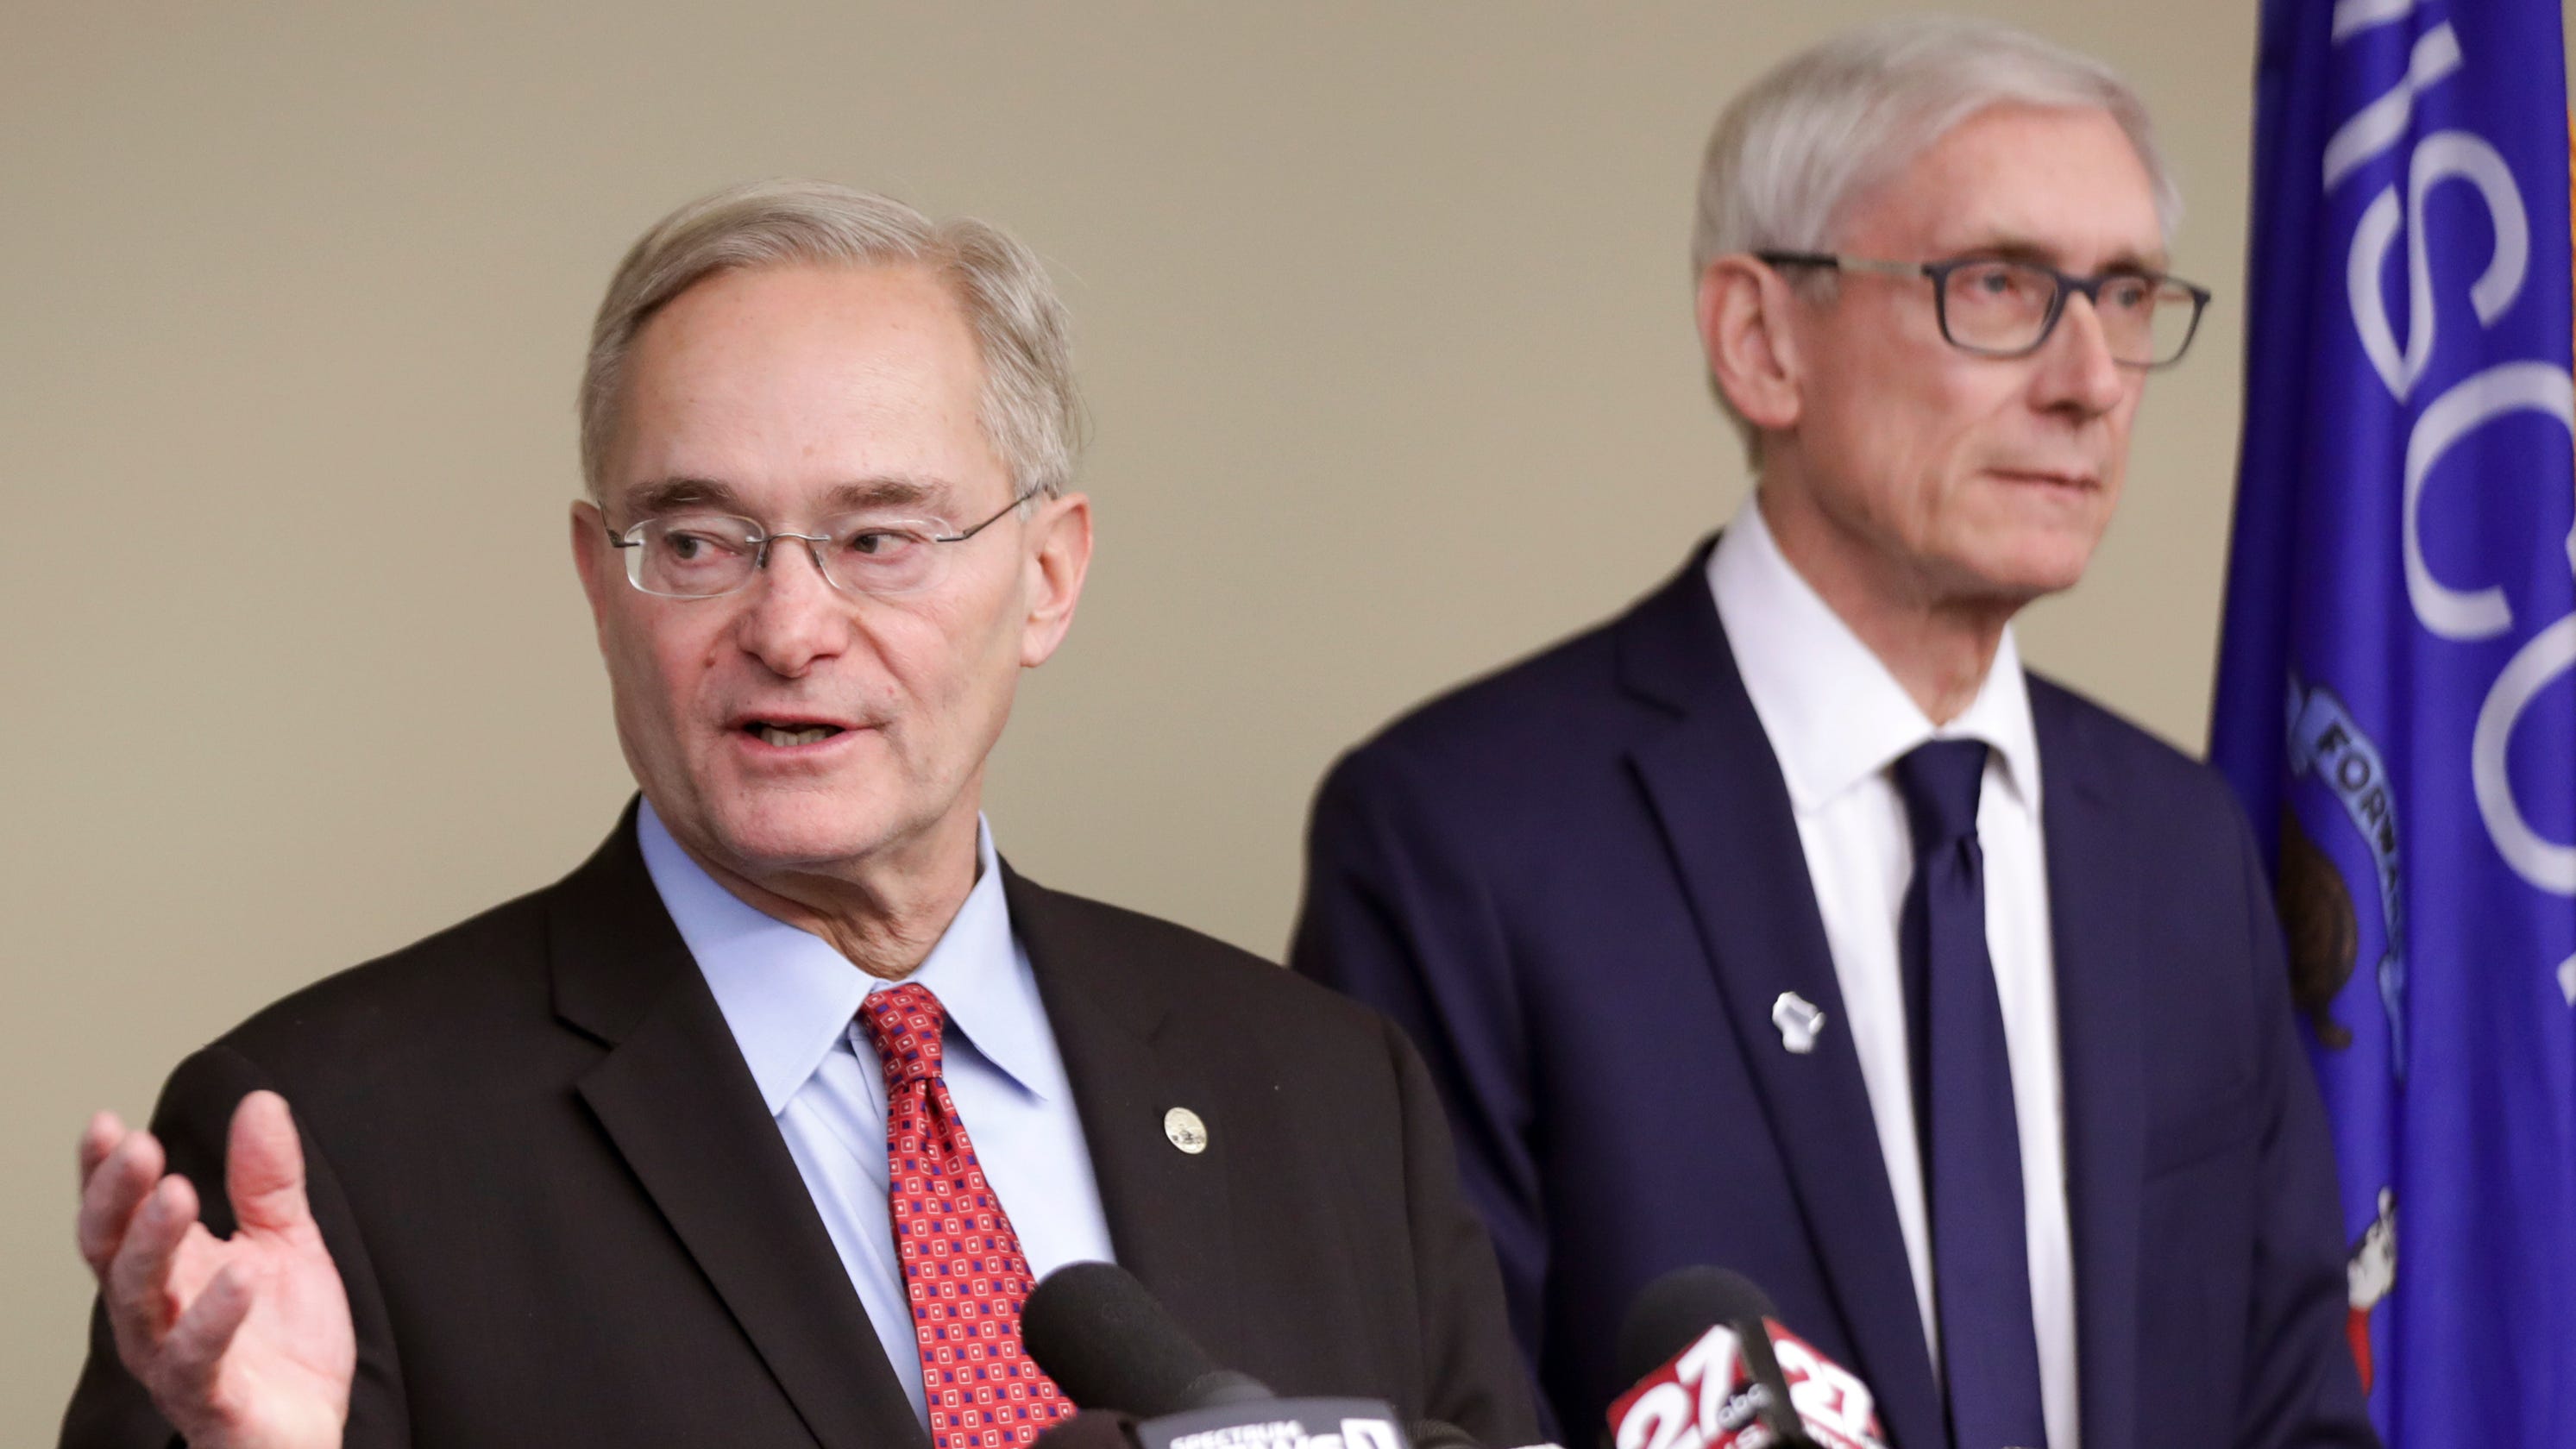 Tony Evers Paying 11 Cabinet Members 10 Or More Over Walker S Aides